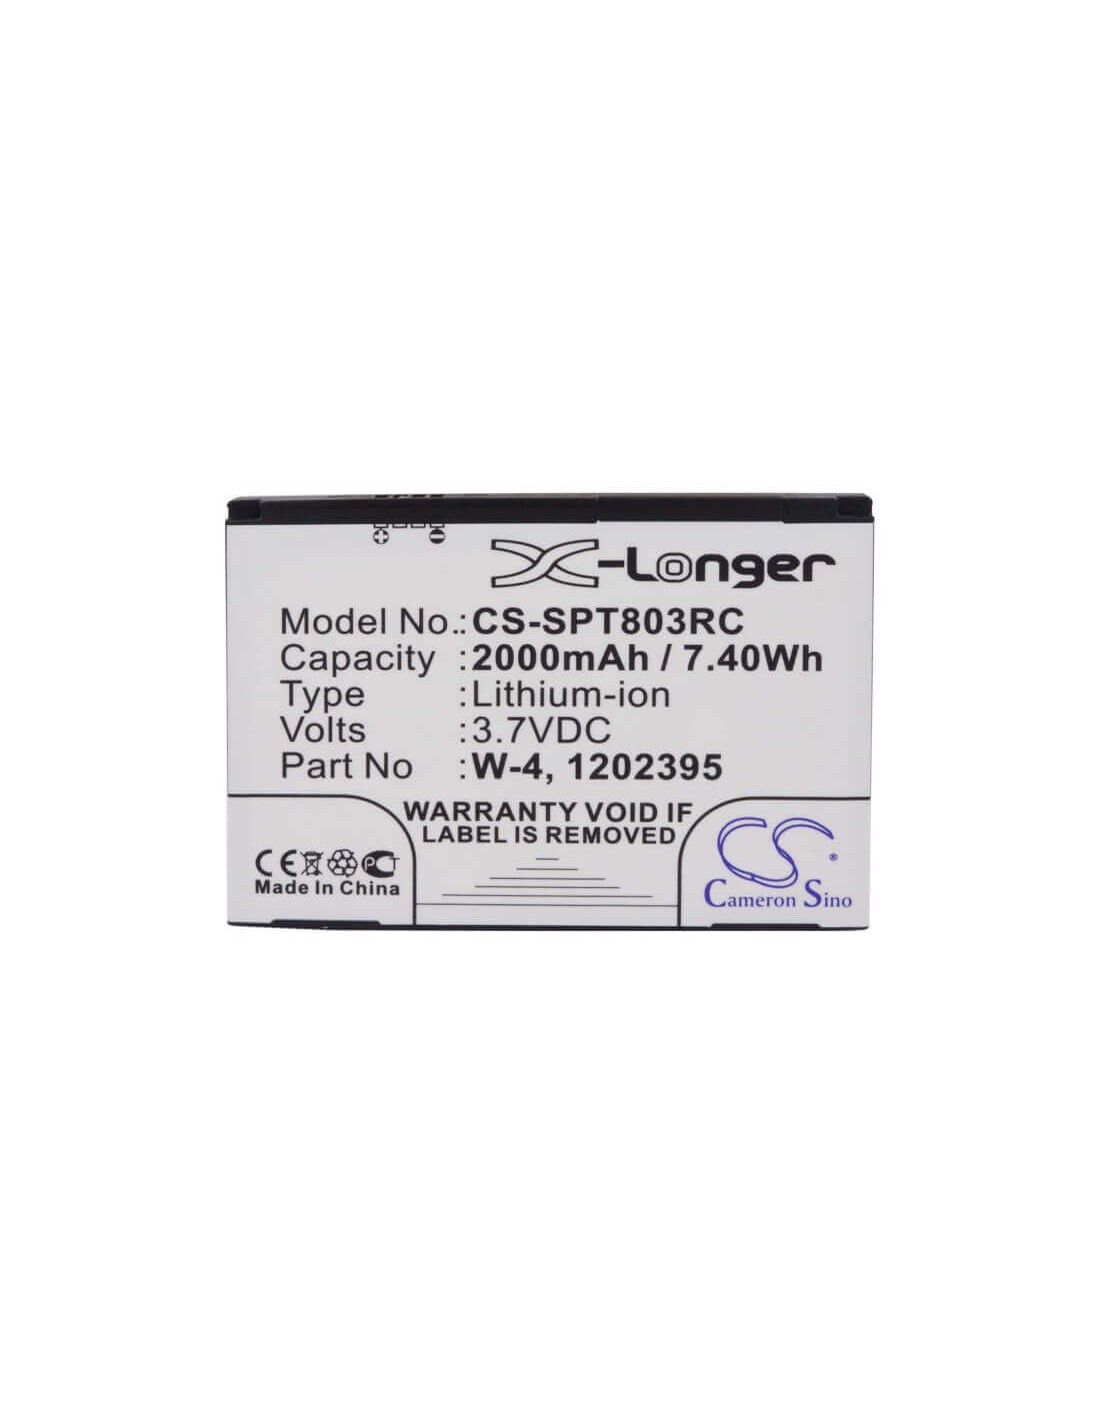 Battery for Sprint 803s 4g Lte, Aircard 803s, Swac803smh 3.7V, 2000mAh - 7.40Wh